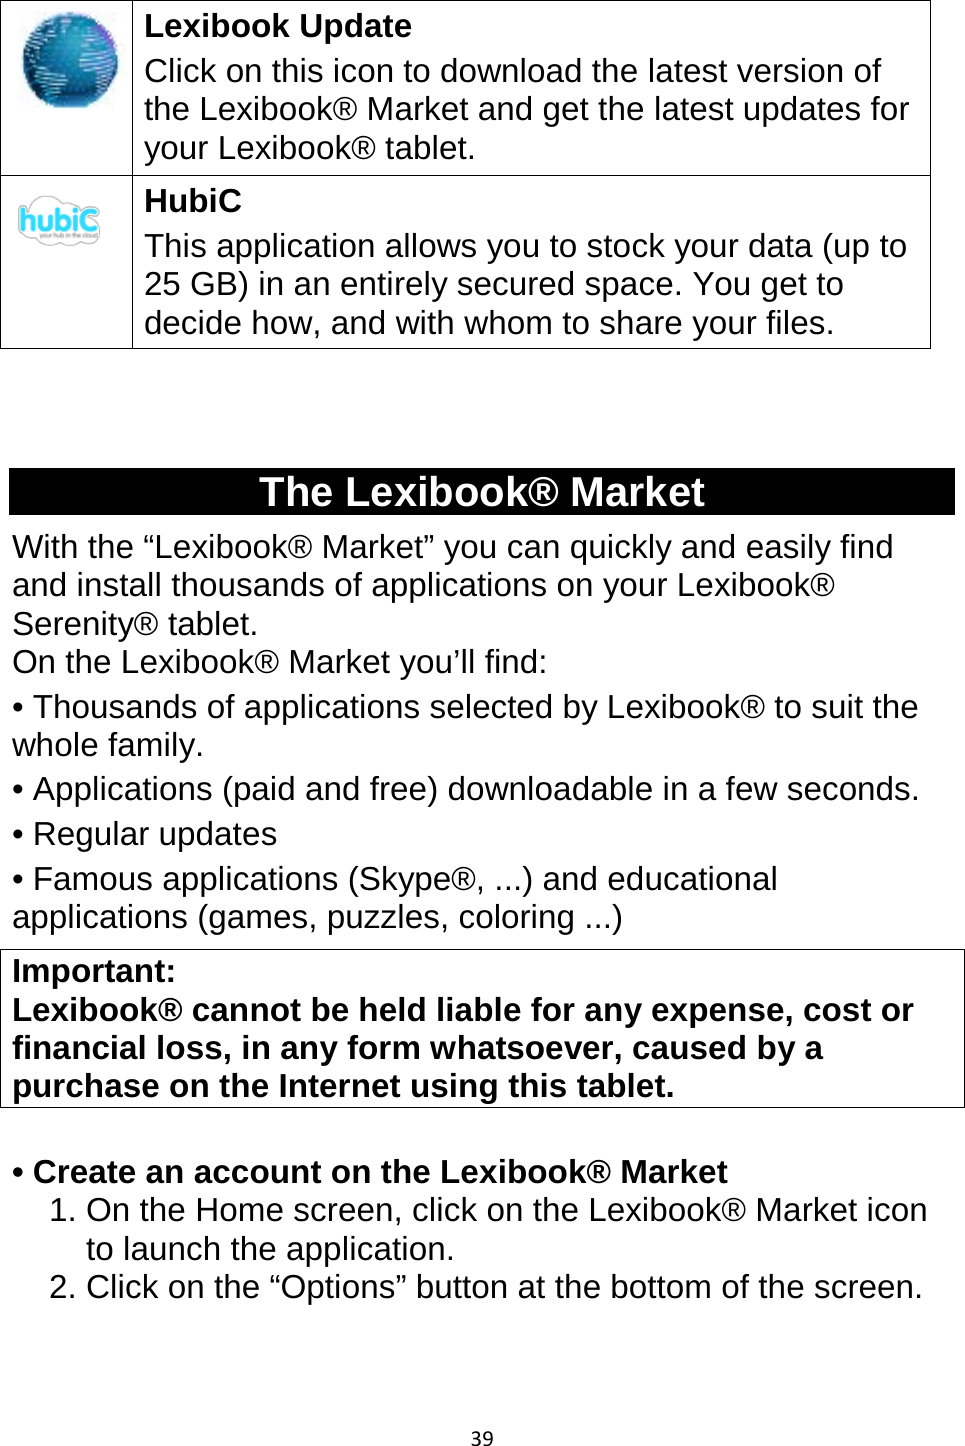 39   Lexibook Update Click on this icon to download the latest version of the Lexibook® Market and get the latest updates for your Lexibook® tablet.  HubiC This application allows you to stock your data (up to 25 GB) in an entirely secured space. You get to decide how, and with whom to share your files.   The Lexibook® Market With the “Lexibook® Market” you can quickly and easily find and install thousands of applications on your Lexibook® Serenity® tablet.  On the Lexibook® Market you’ll find: • Thousands of applications selected by Lexibook® to suit the whole family. • Applications (paid and free) downloadable in a few seconds. • Regular updates  • Famous applications (Skype®, ...) and educational applications (games, puzzles, coloring ...) Important:  Lexibook® cannot be held liable for any expense, cost or financial loss, in any form whatsoever, caused by a purchase on the Internet using this tablet.  • Create an account on the Lexibook® Market 1. On the Home screen, click on the Lexibook® Market icon to launch the application. 2. Click on the “Options” button at the bottom of the screen.  